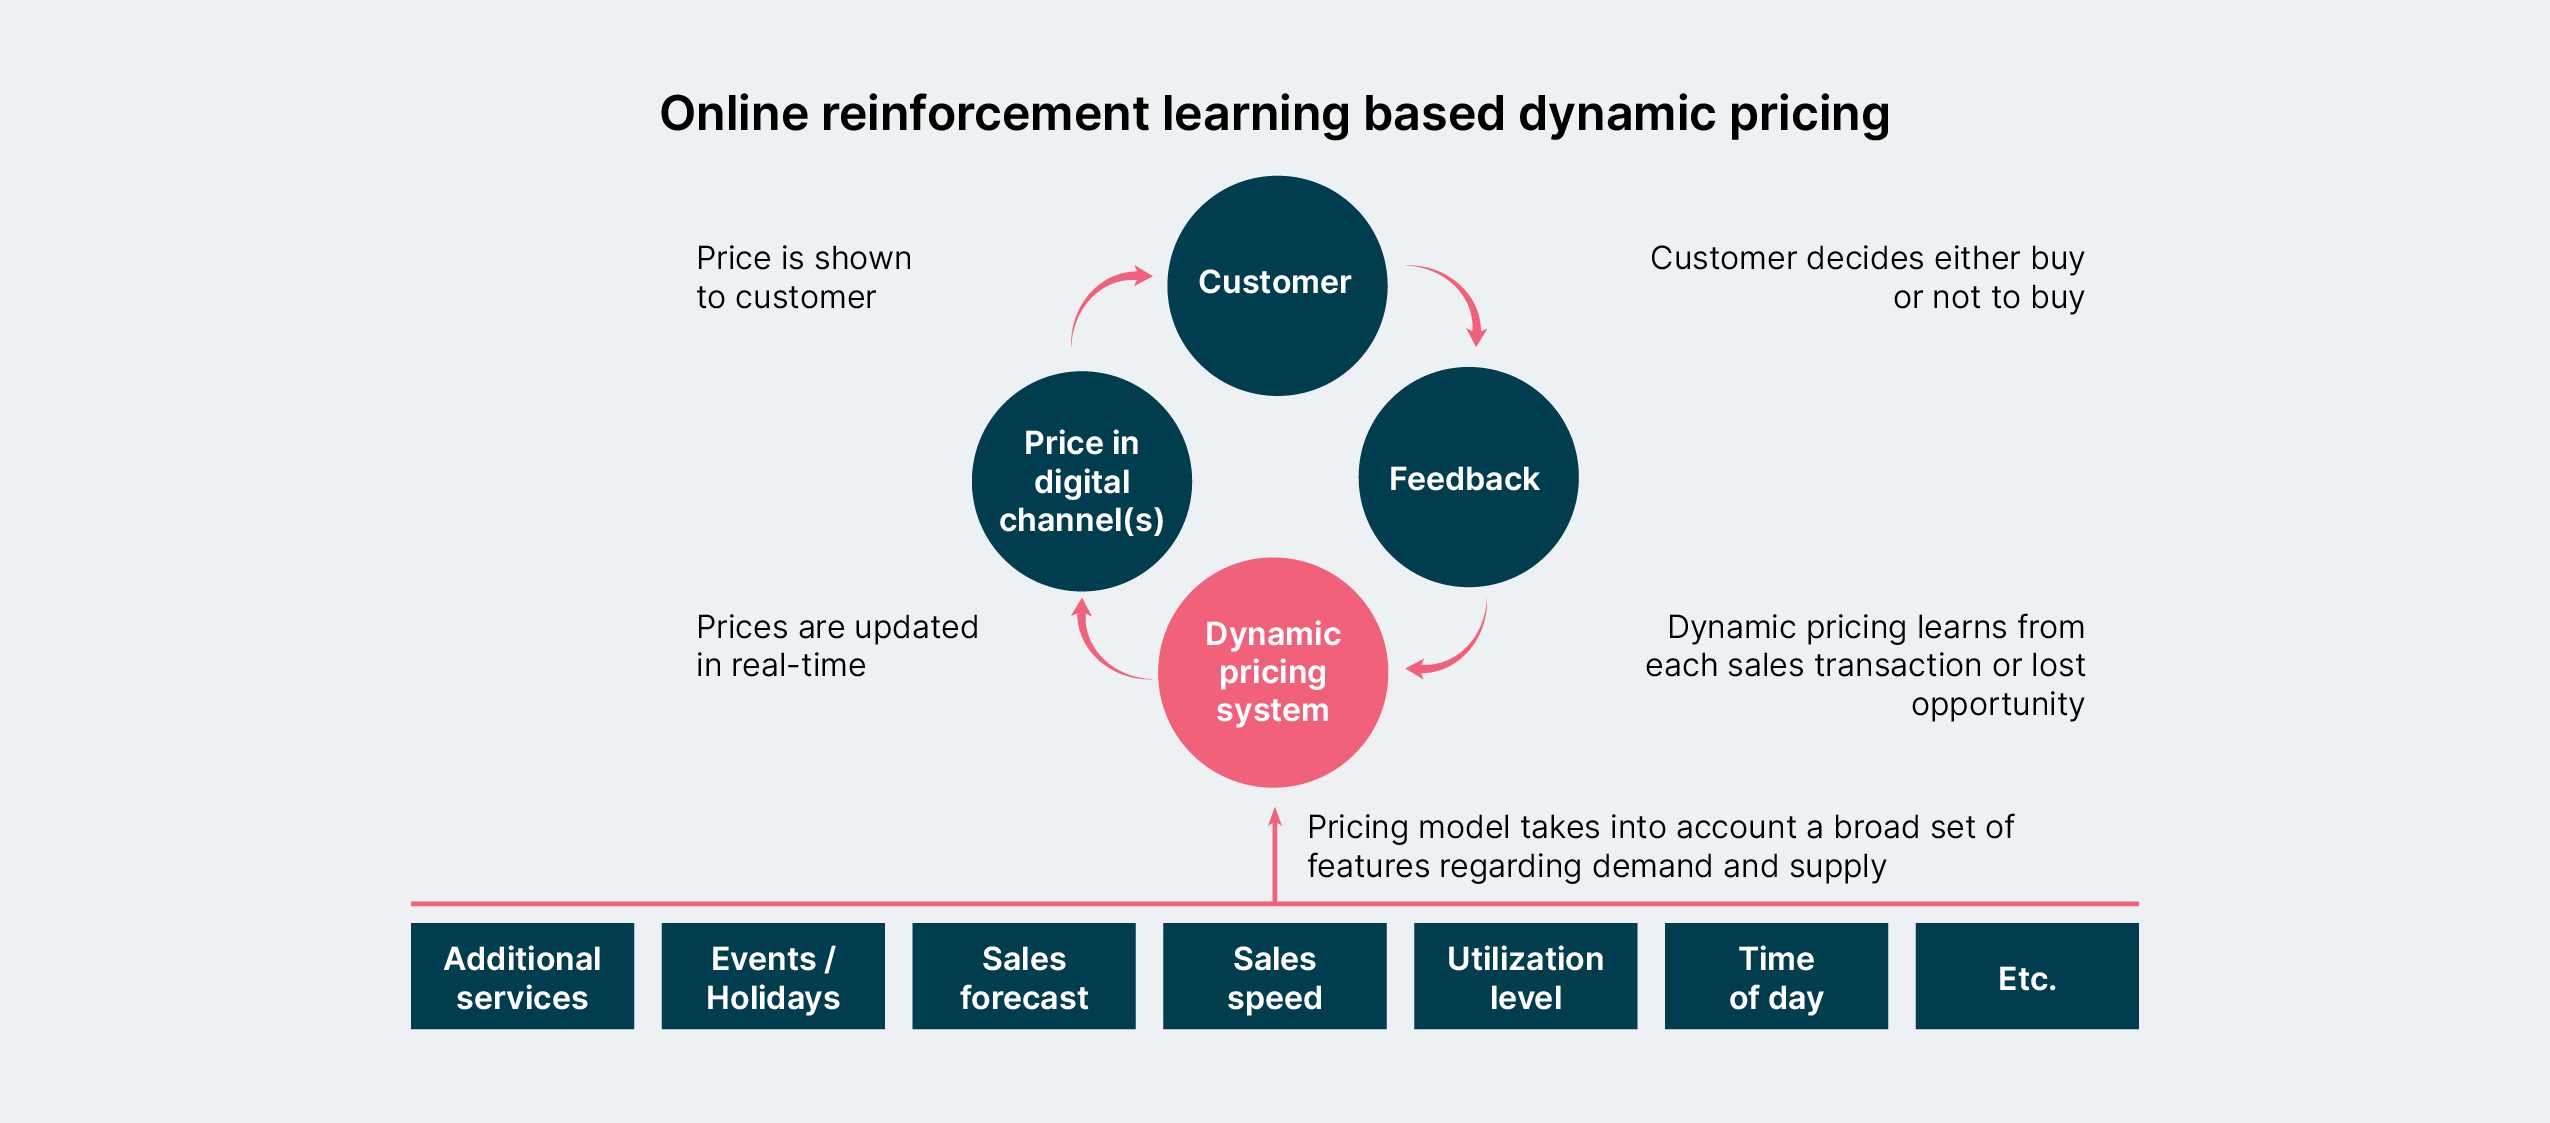 The online reinforcement learning based dynamic pricing loop. 